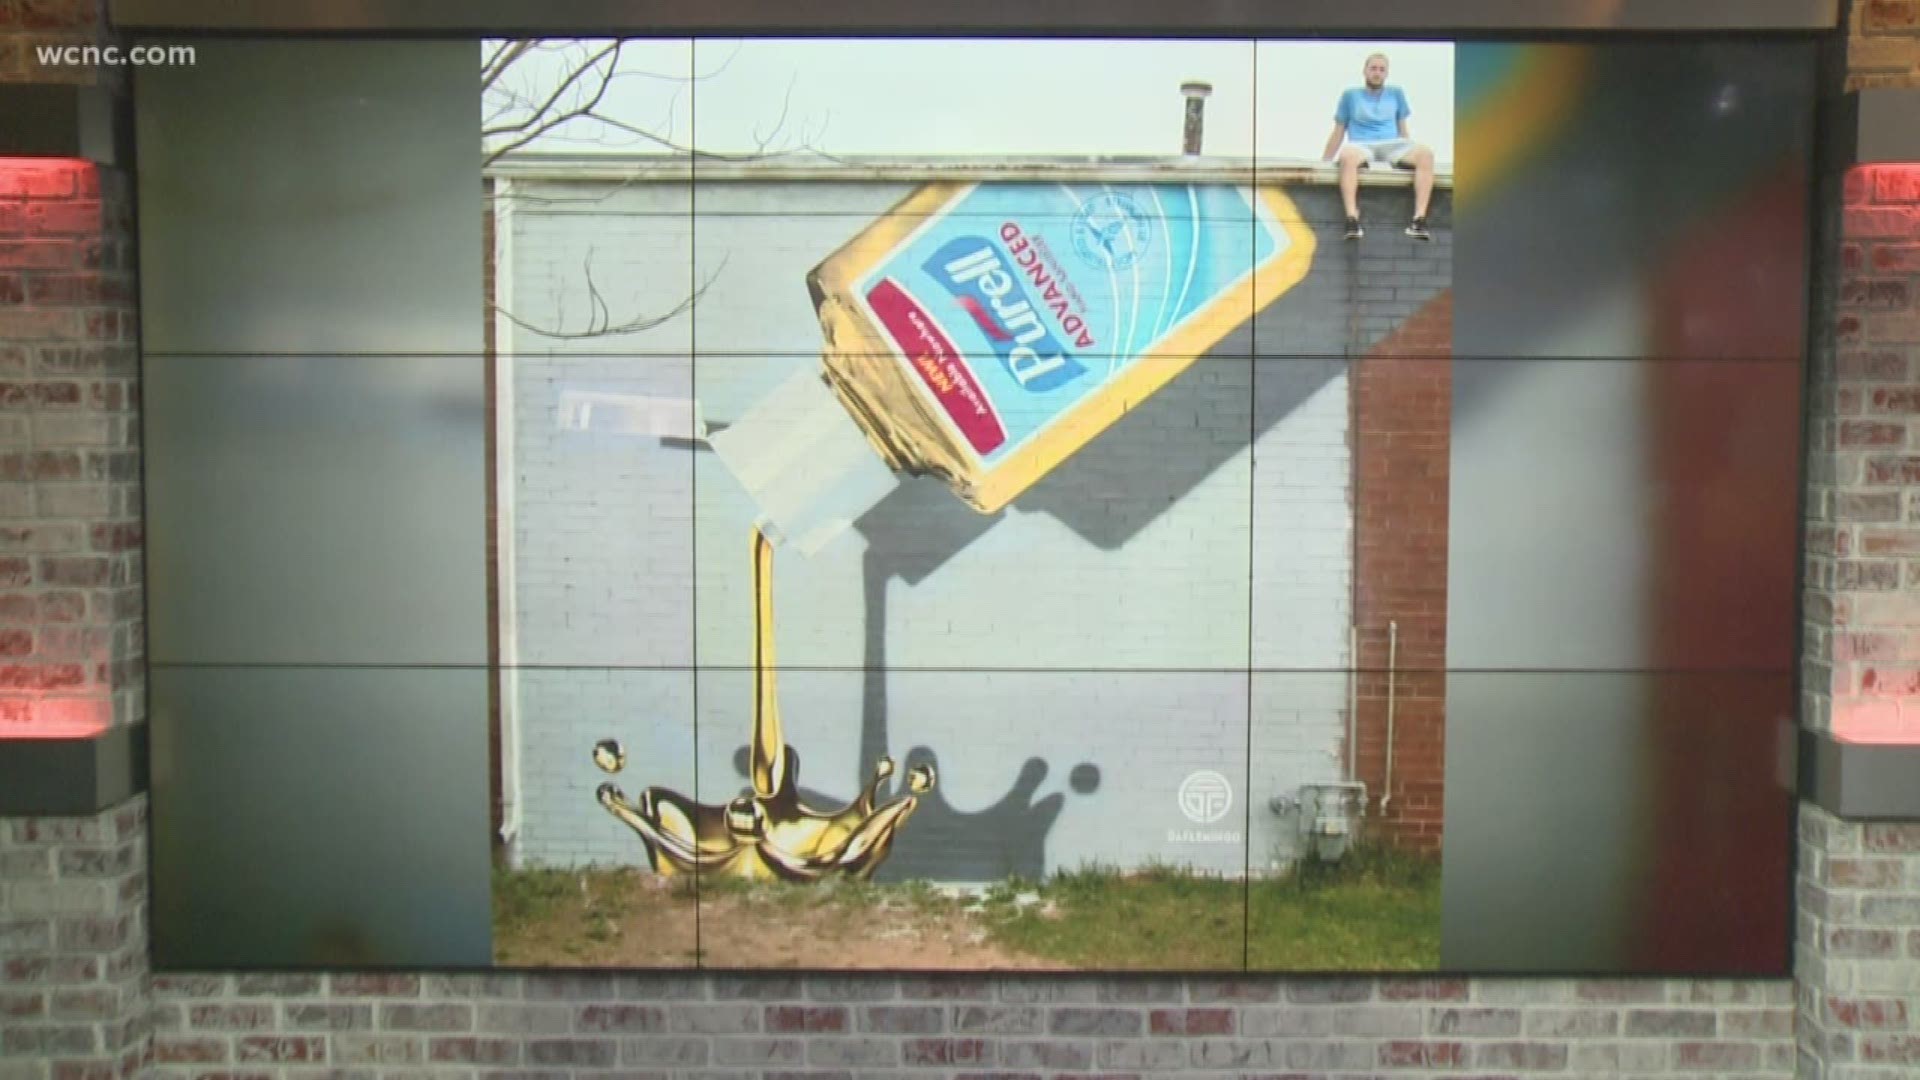 A Charlotte artist's new mural put a lighthearted spin on just how difficult it is to find hand sanitizer.